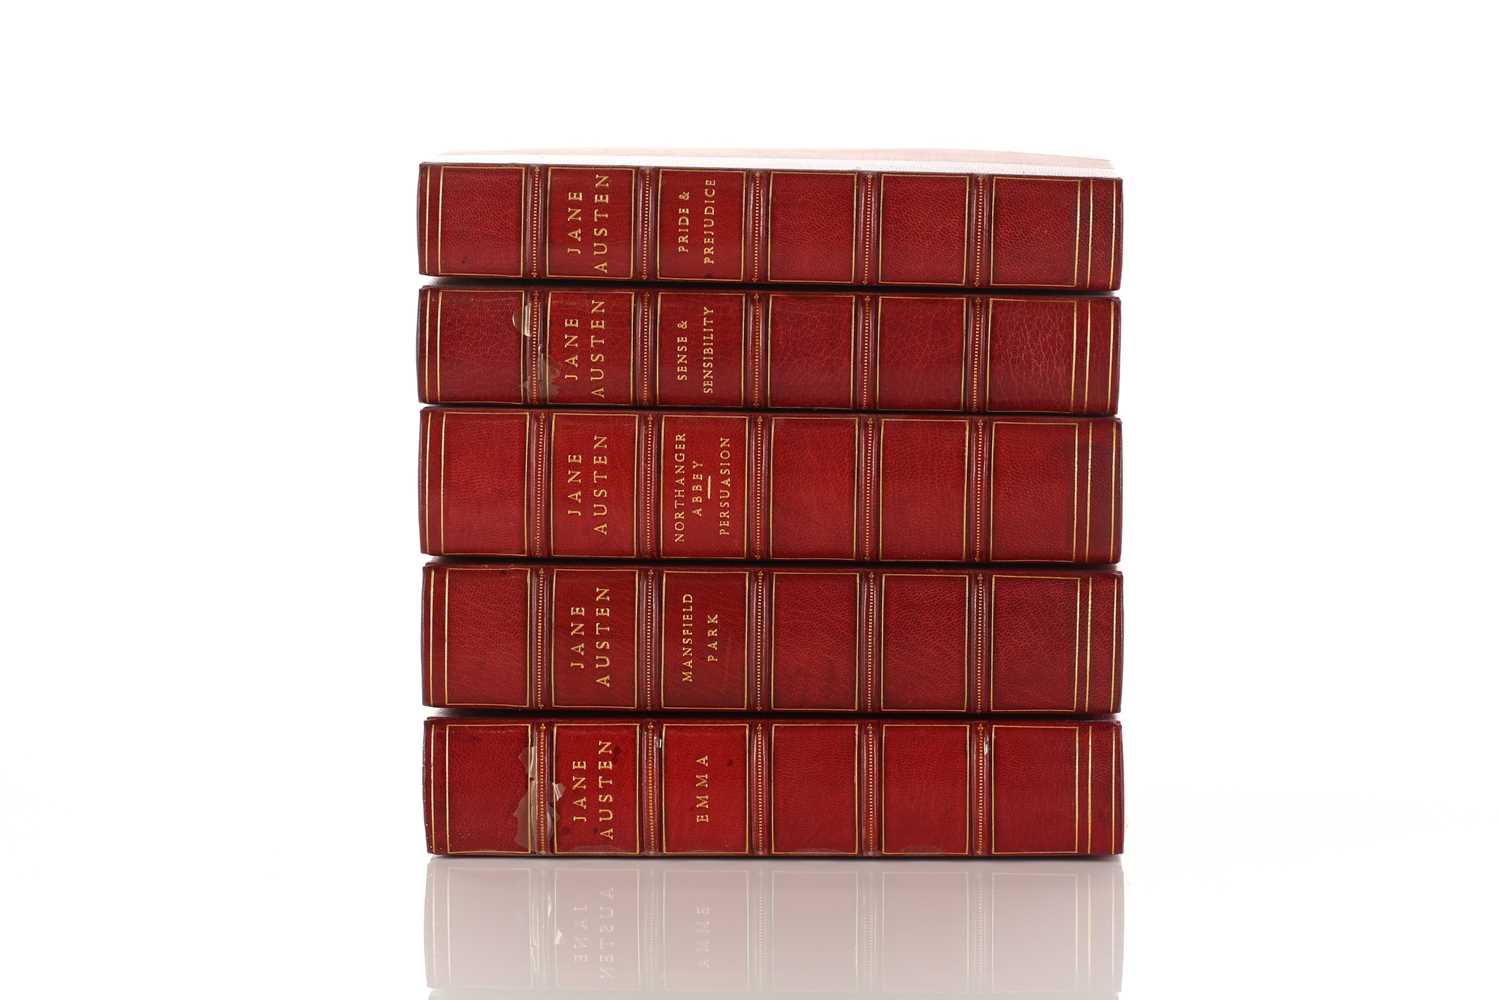 Austen, Jane; 'The Novels of..' in five volumes, The Text Based on Collation of the Early Editions - Image 14 of 24